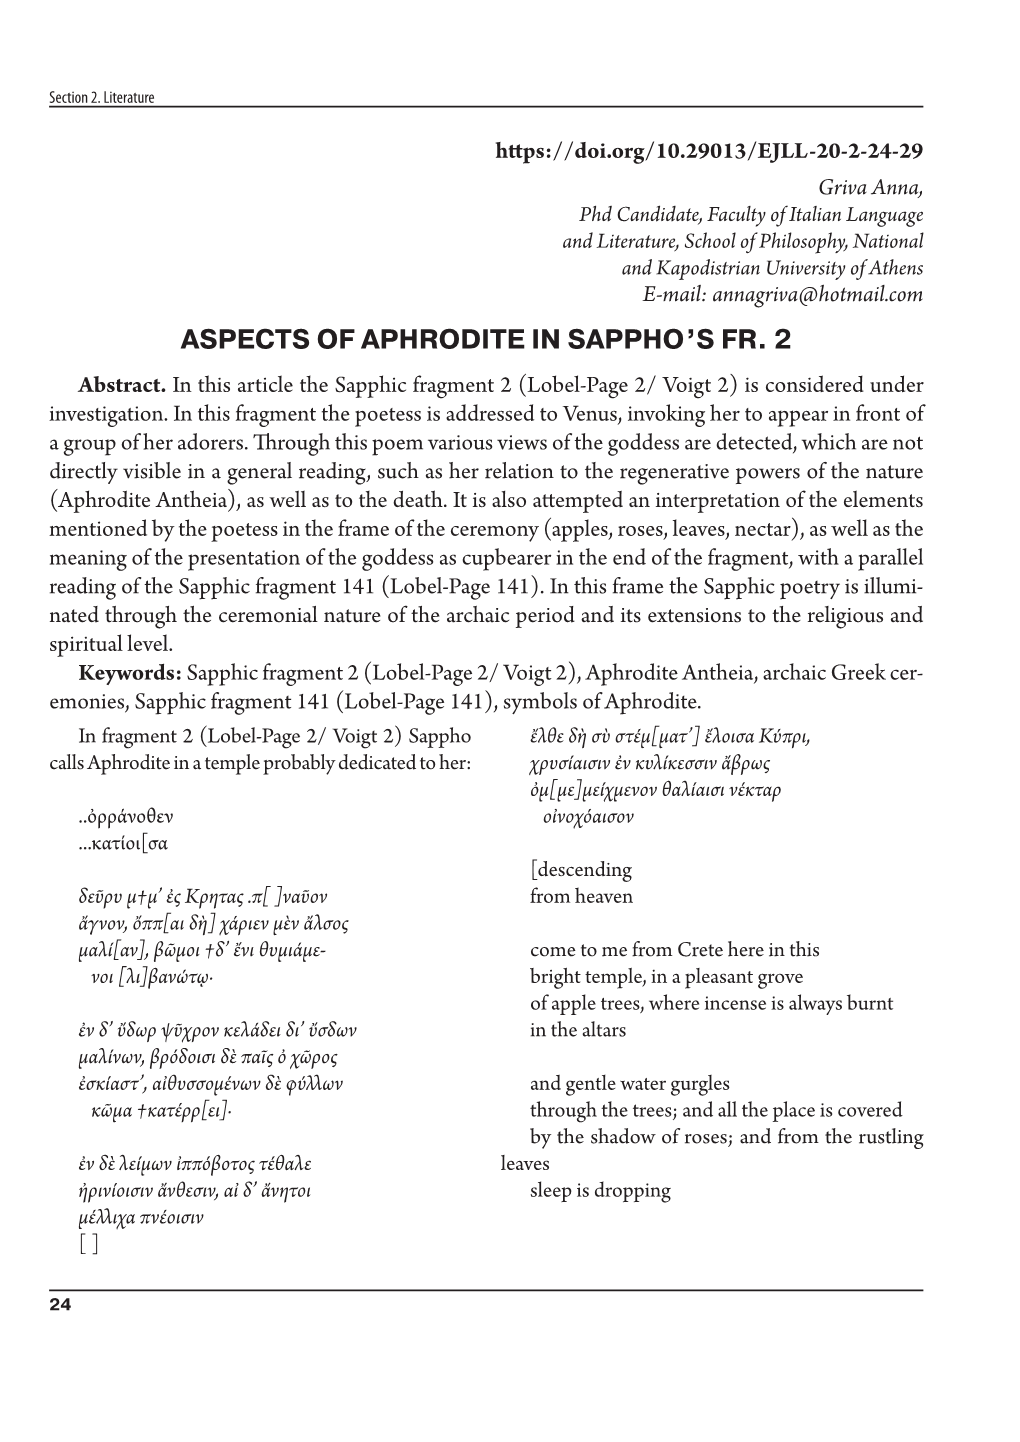 Aspects of Aphrodite in Sappho's Fr. 2